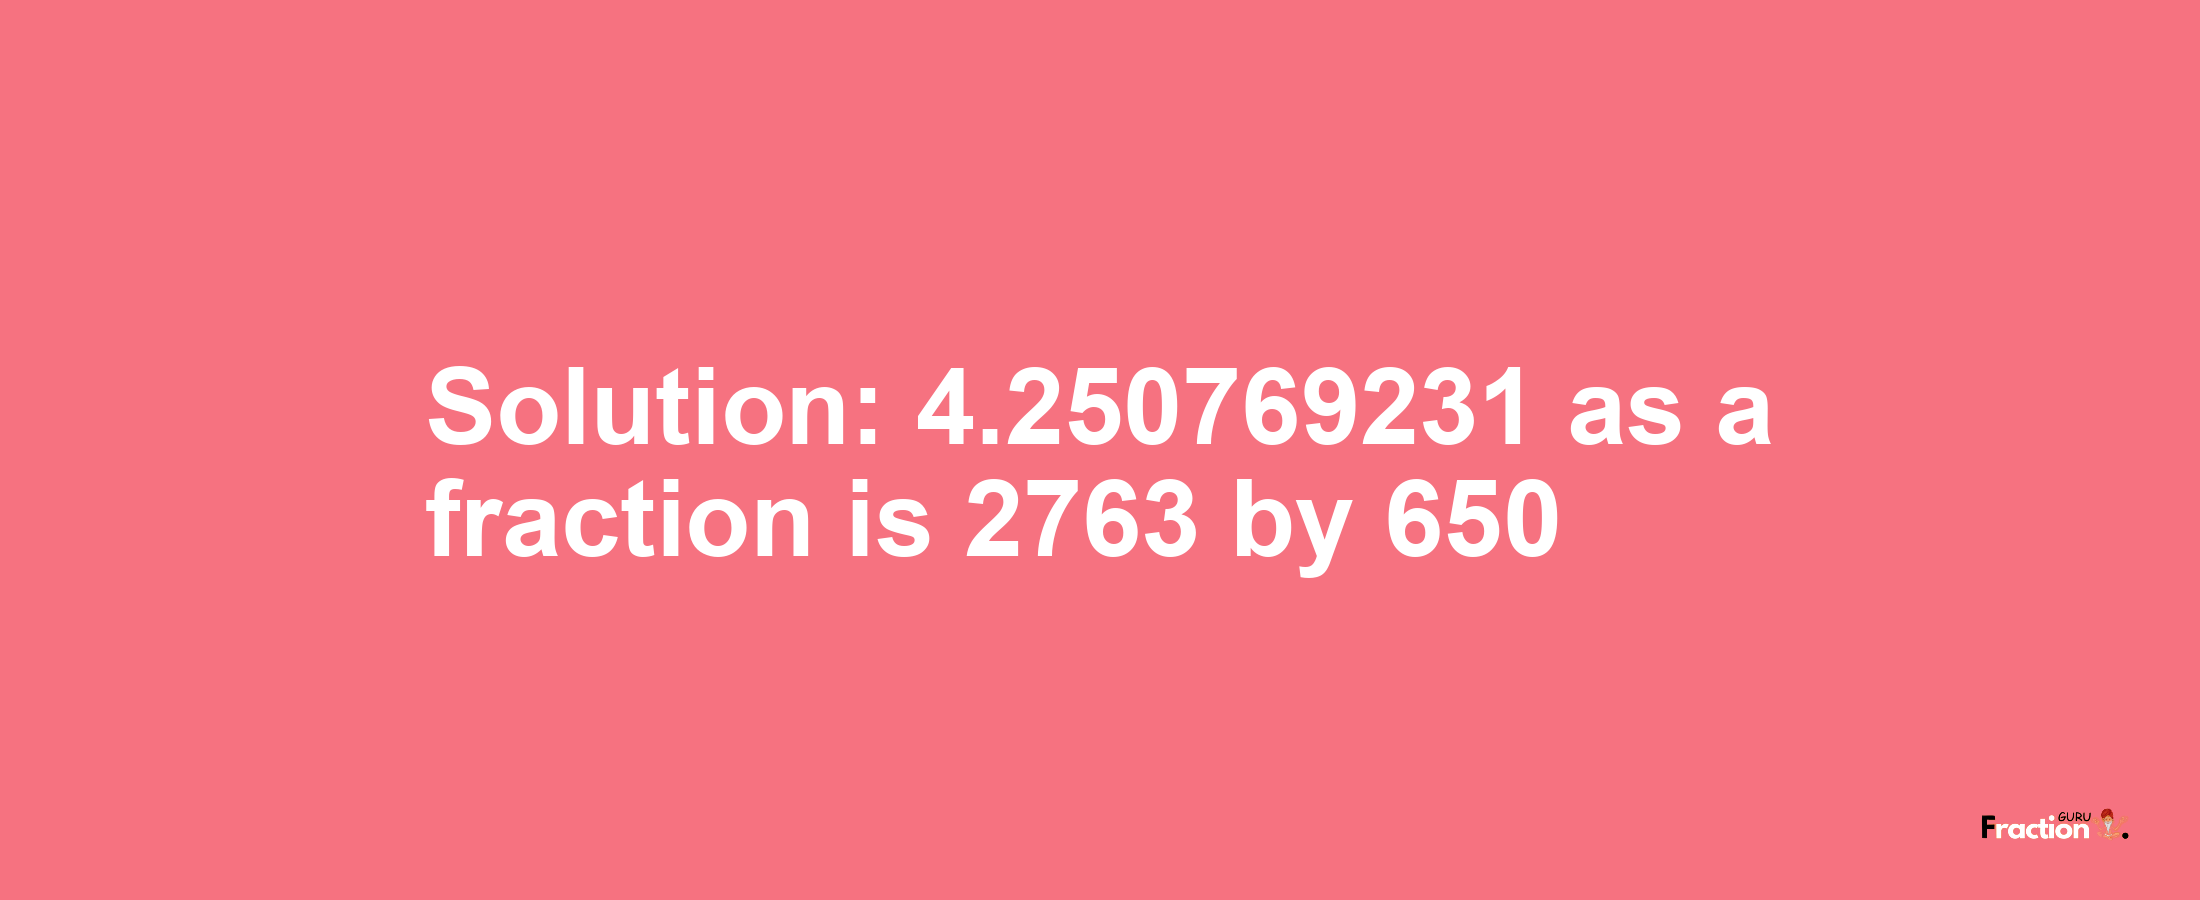 Solution:4.250769231 as a fraction is 2763/650